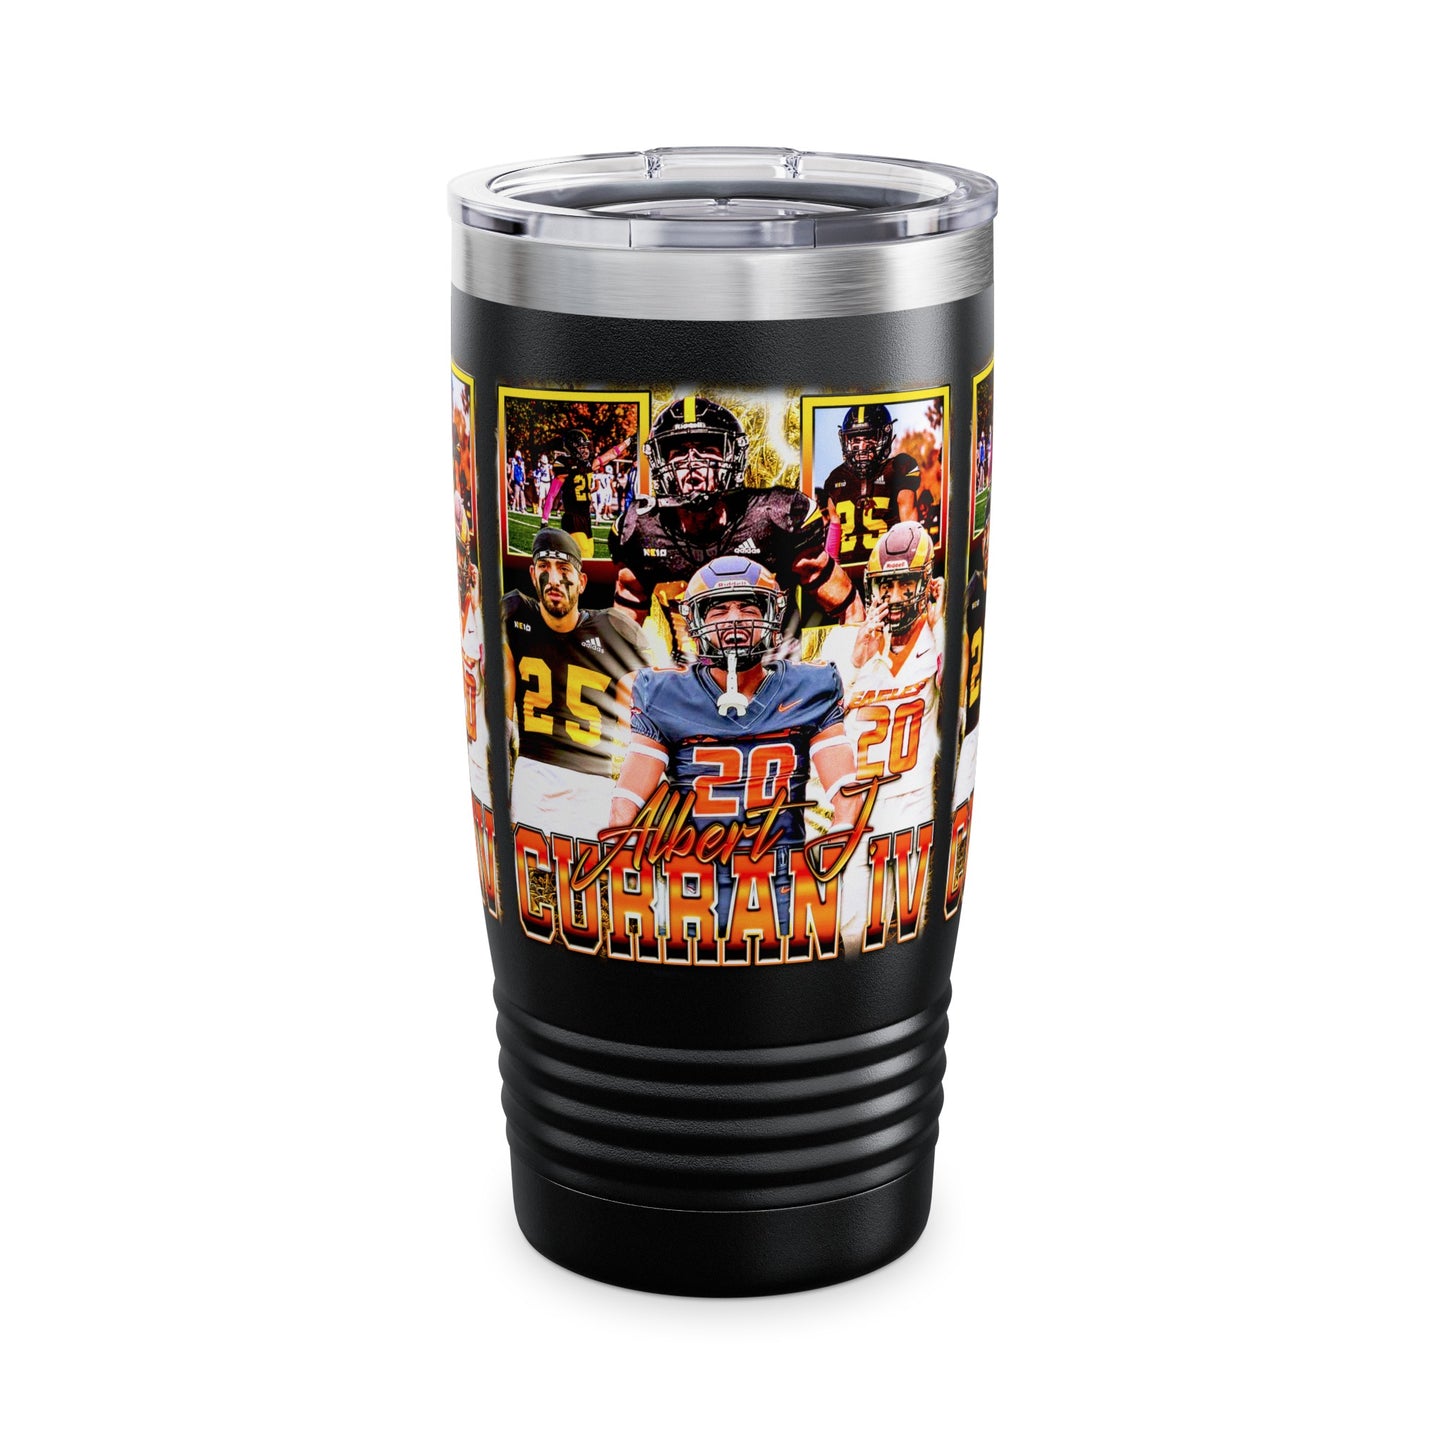 Curran IV Stainless Steal Tumbler